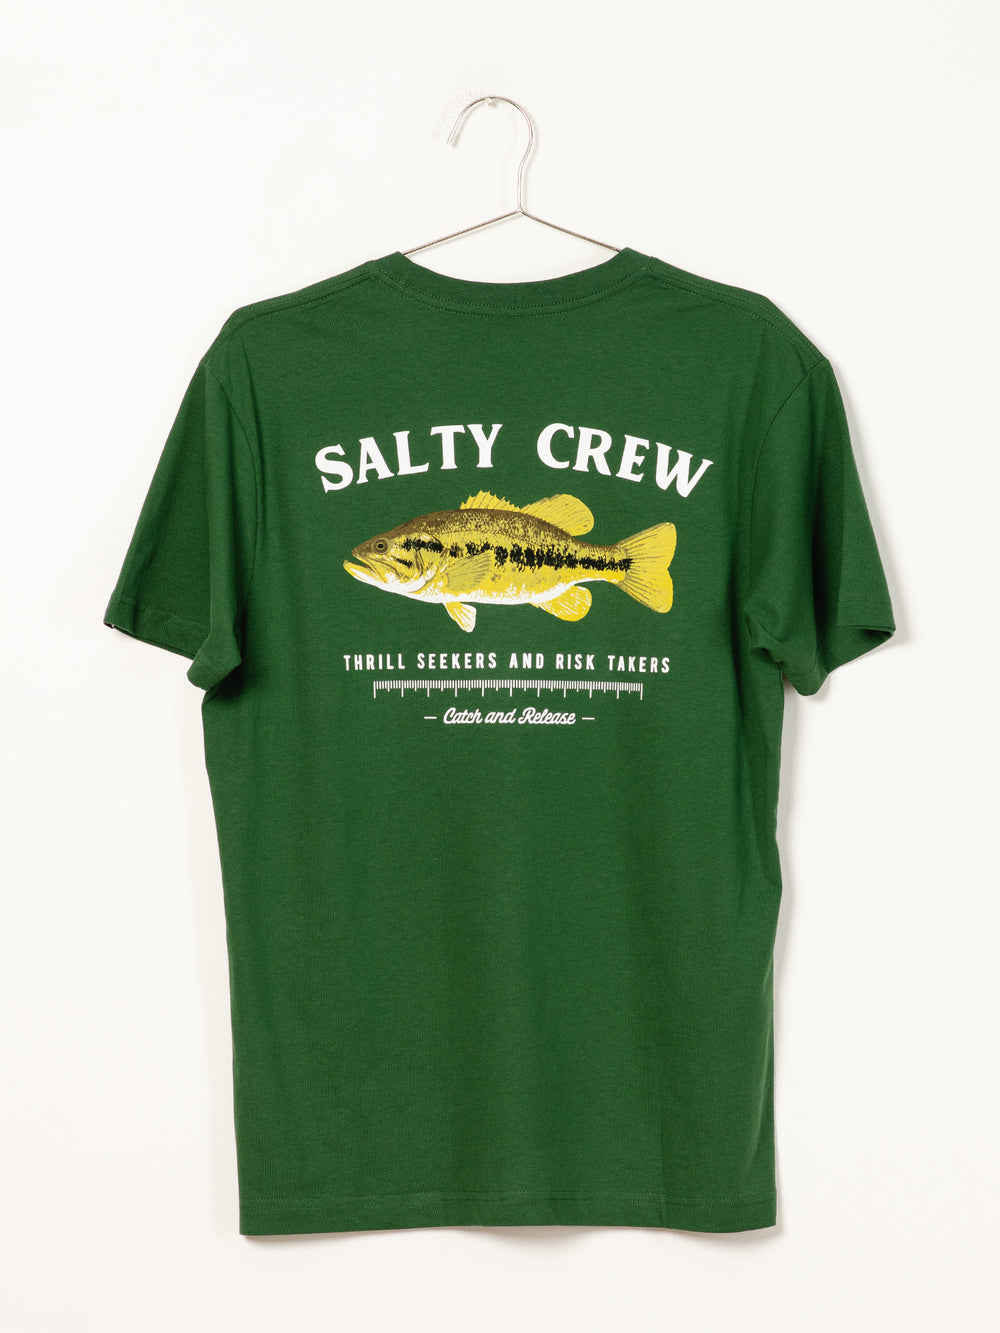 SALTY CREW BIG MOUTH PREMIUM T-SHIRT  - CLEARANCE